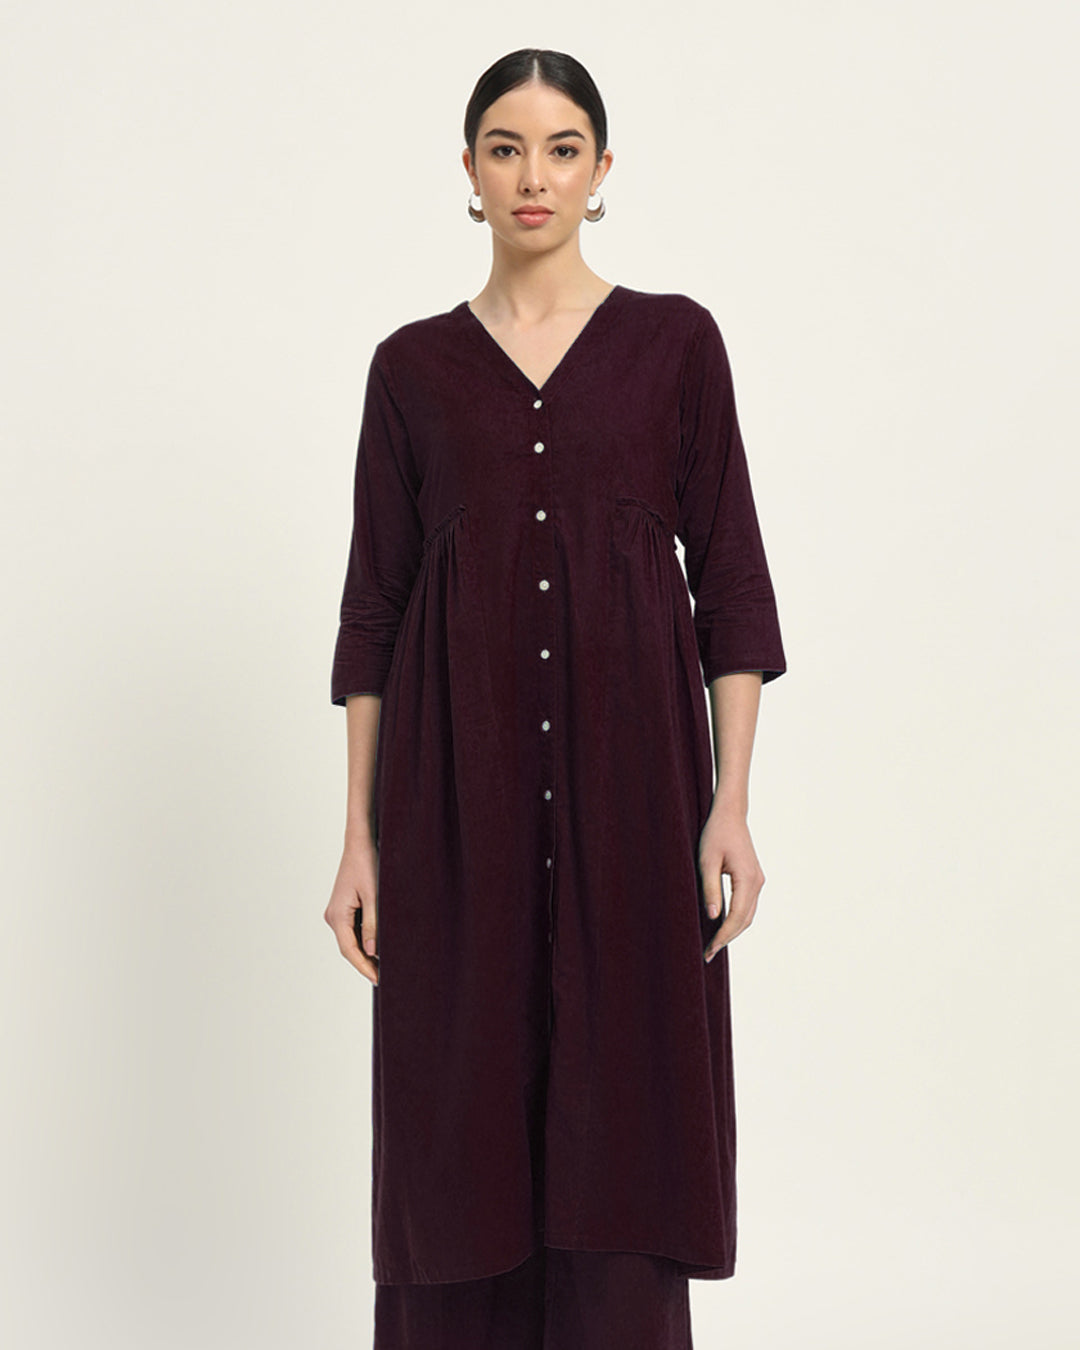 Plum Passion Whimsy Affair Buttoned Solid Kurta (Without Bottoms)